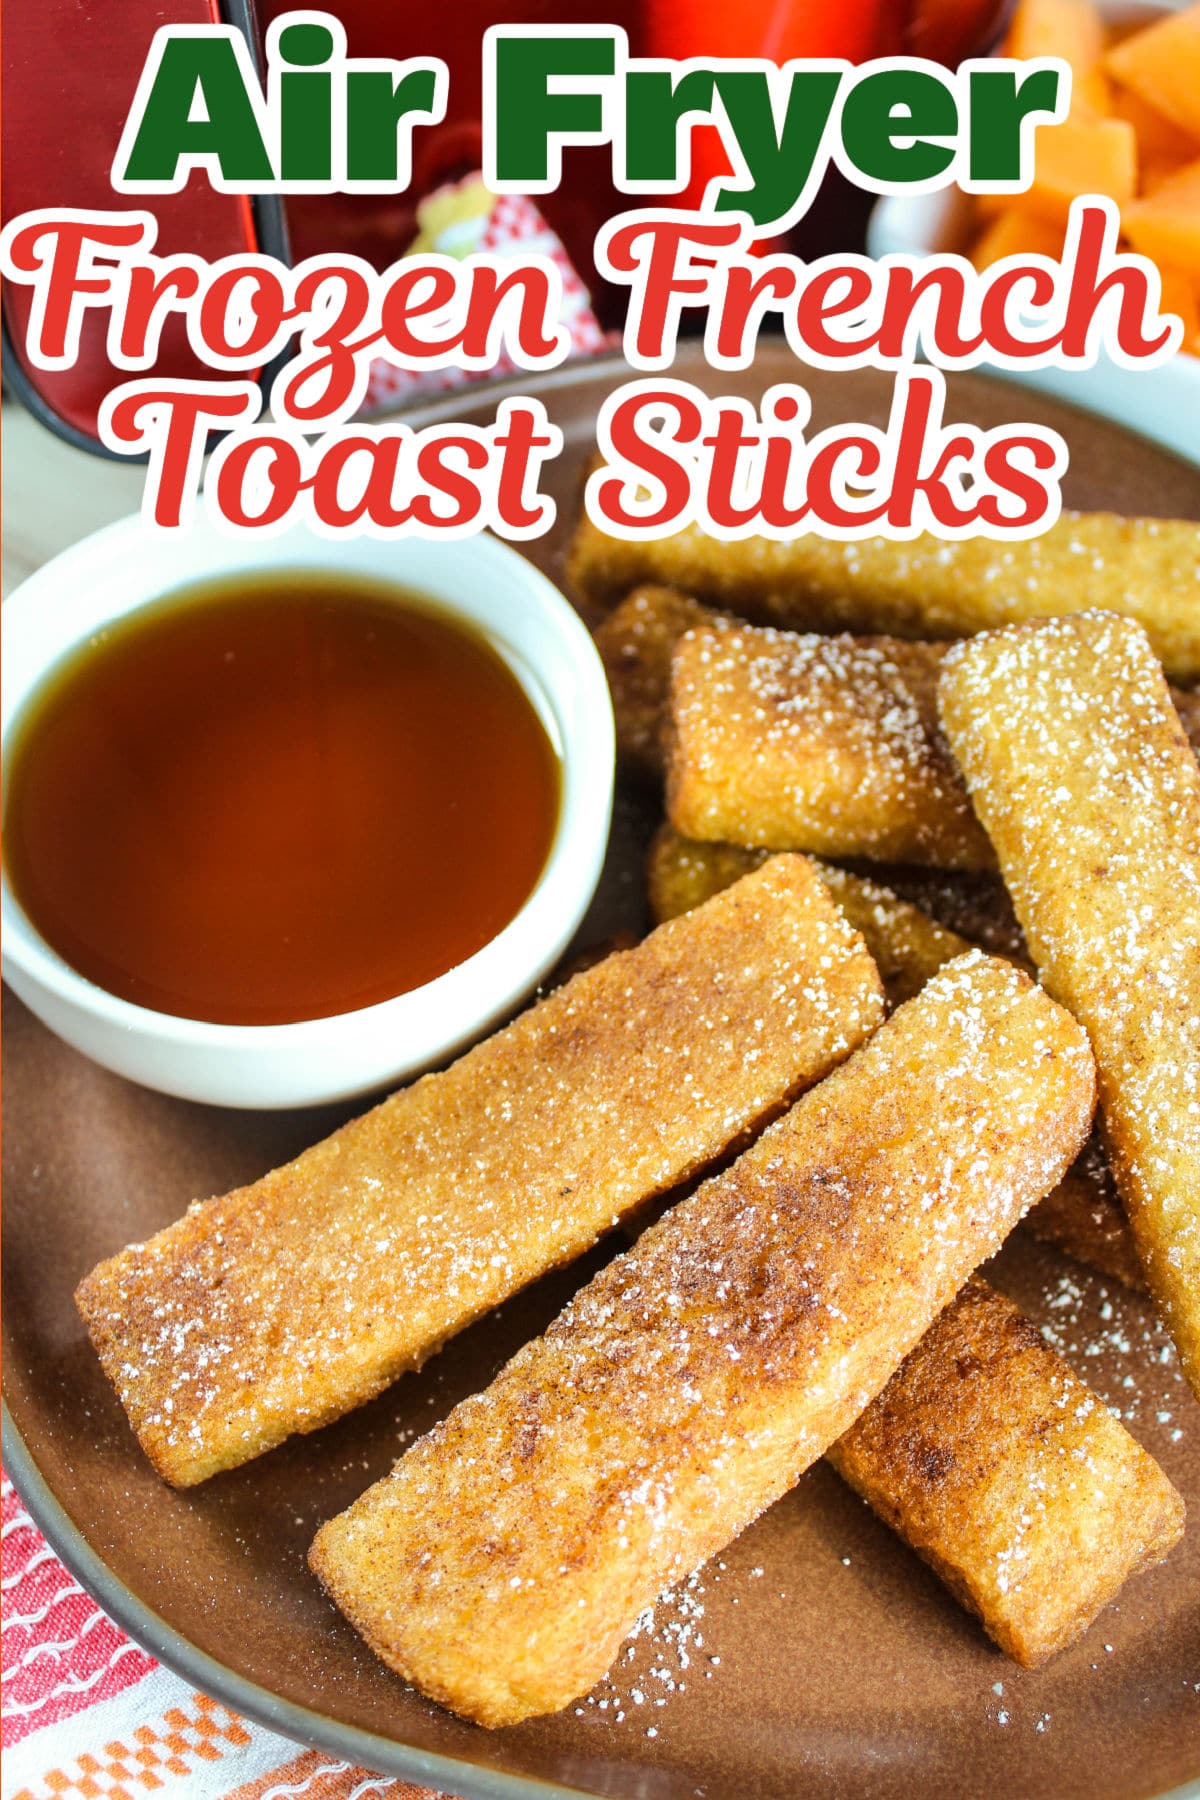 Air Fryer Frozen French Toast Sticks make a quick breakfast even quicker! It's super easy to just pop them in and you've got breakfast in a few minutes! via @foodhussy